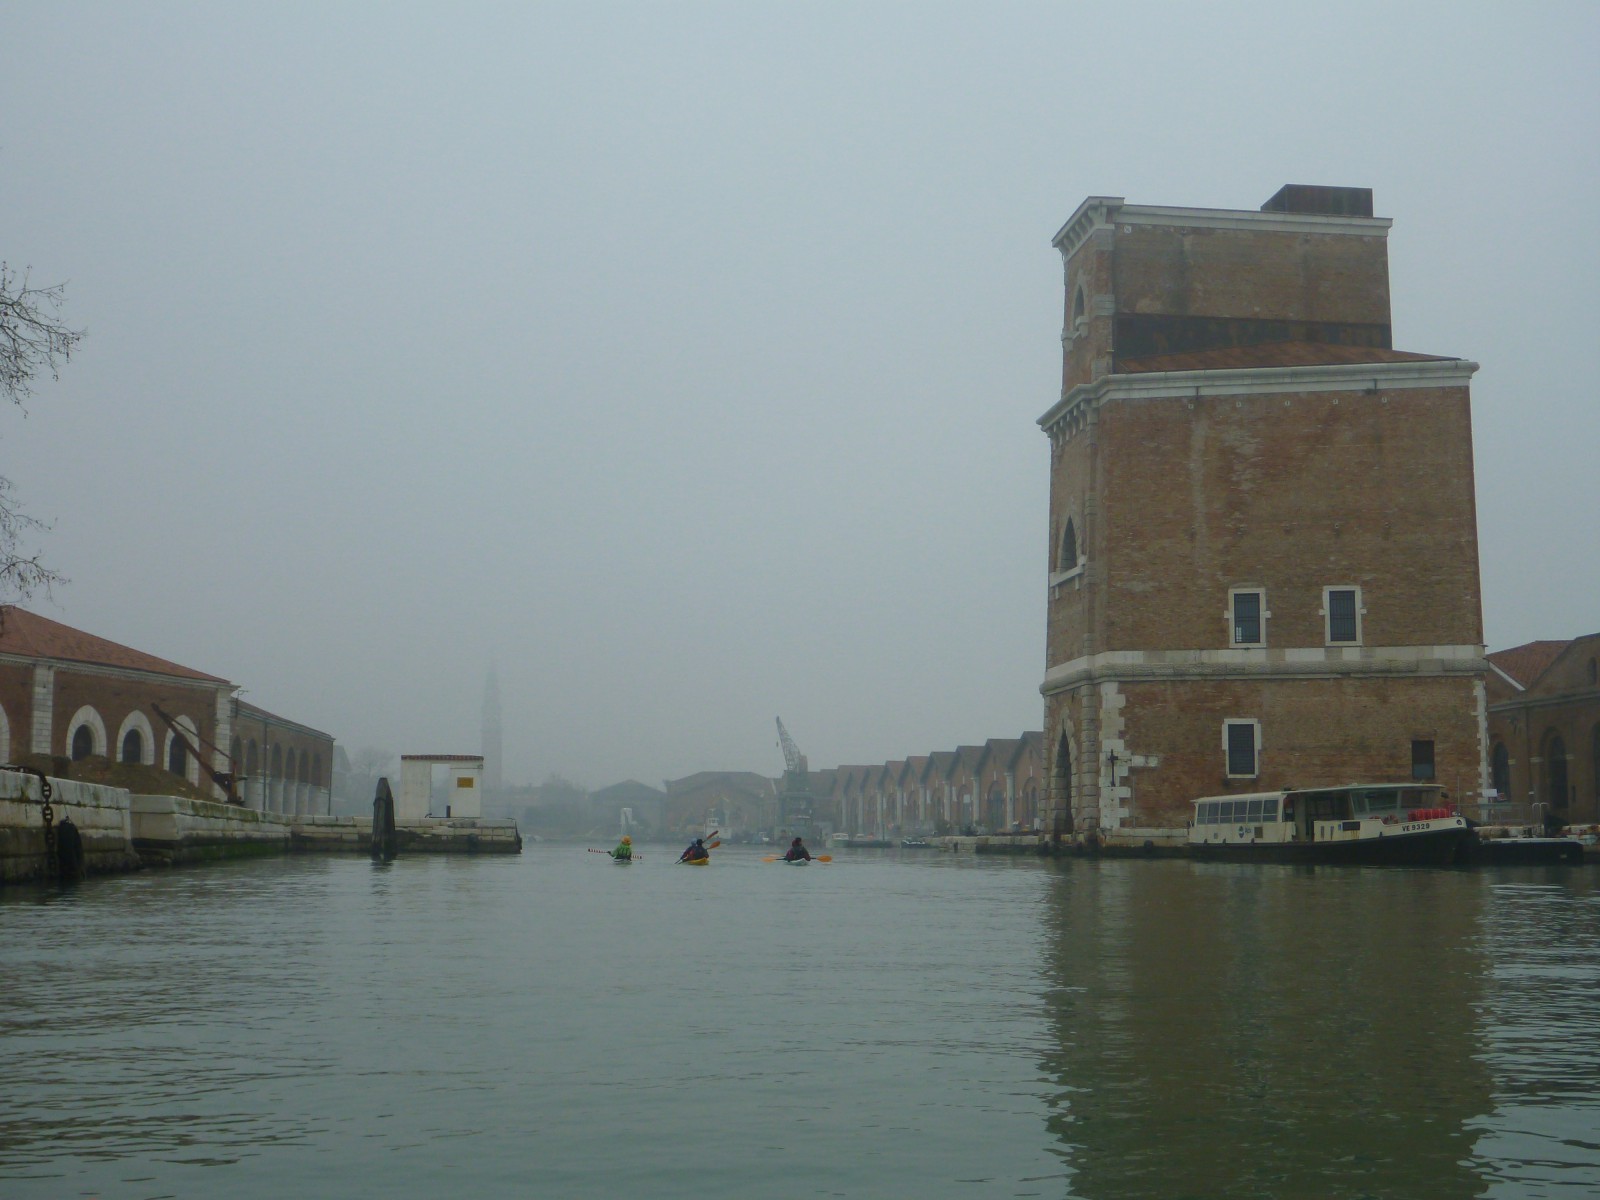 Entering the Arsenale